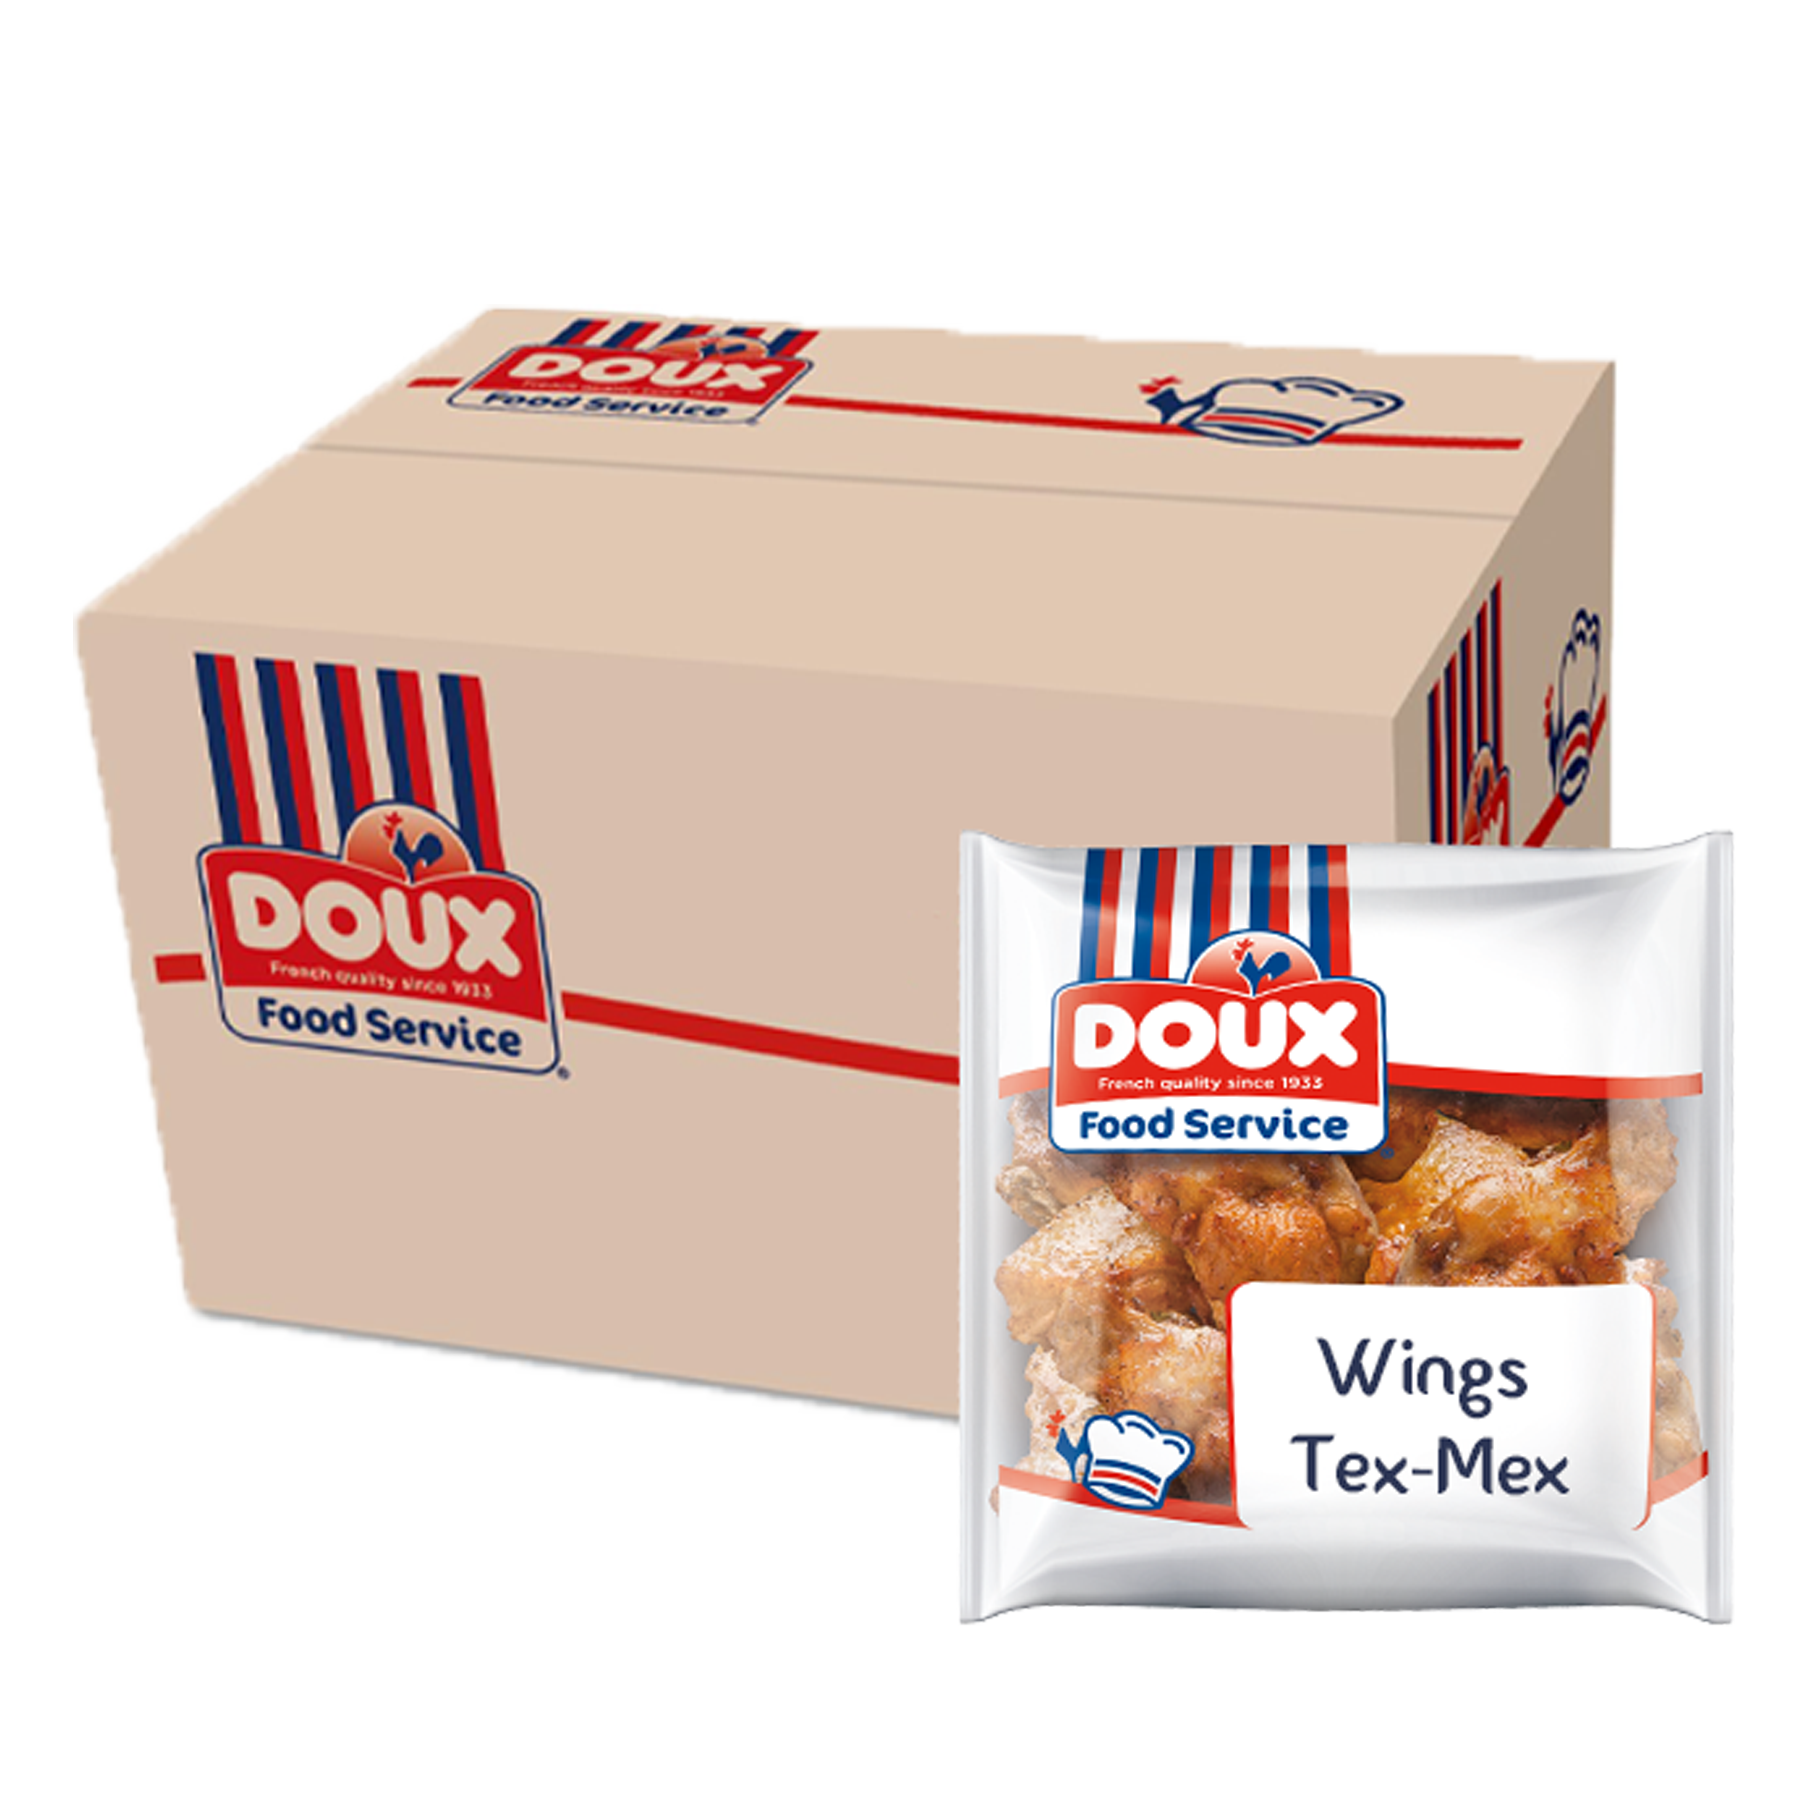 Doux Food Service box and the 1KG Doux Food Service bag